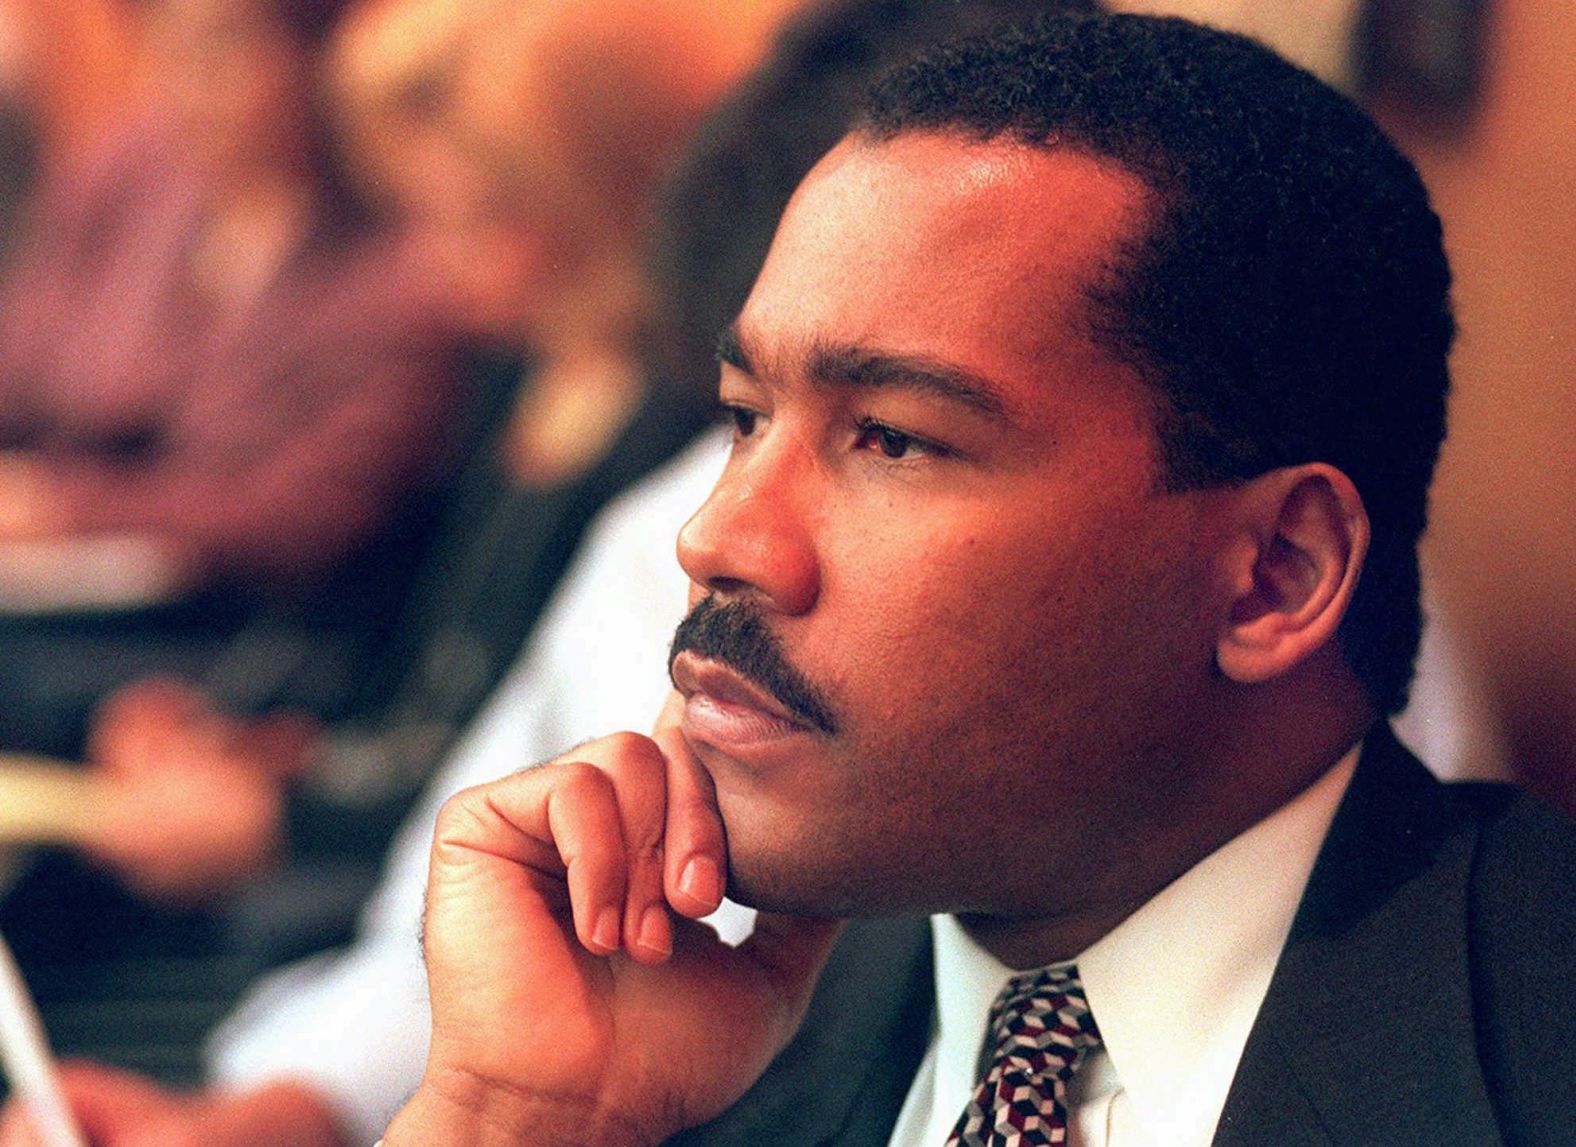 <a href="https://www.cnn.com/2024/01/22/us/dexter-king-death-martin-luther/index.html" target="_blank">Dexter Scott King</a>, the youngest son of Martin Luther King Jr., died after a battle with prostate cancer, according to statements from his family and the King Center on January 22. He was 62.